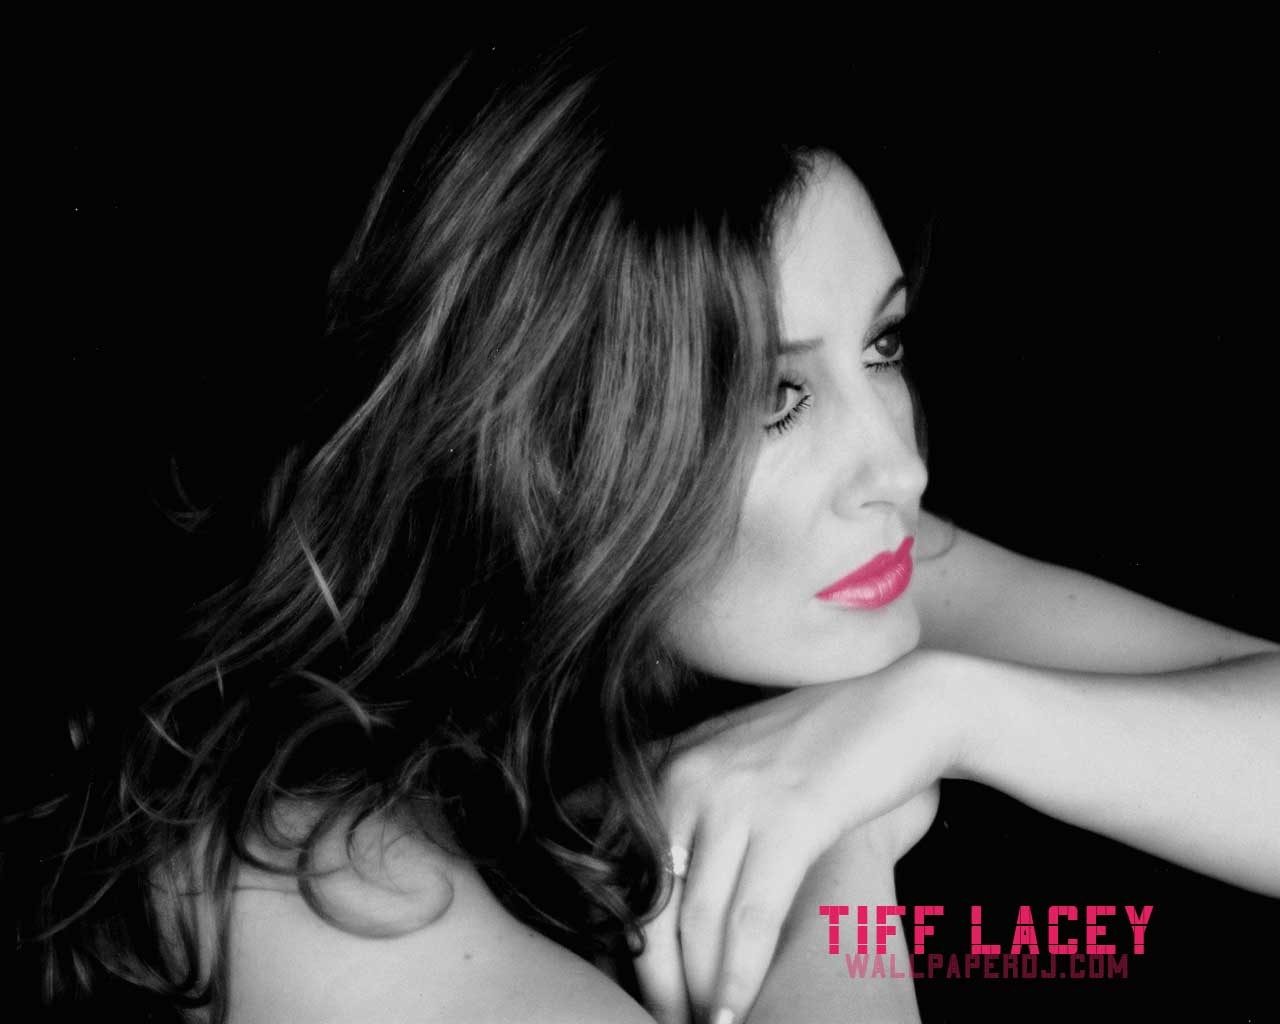 Tiff Lacey HD and Wide Wallpapers